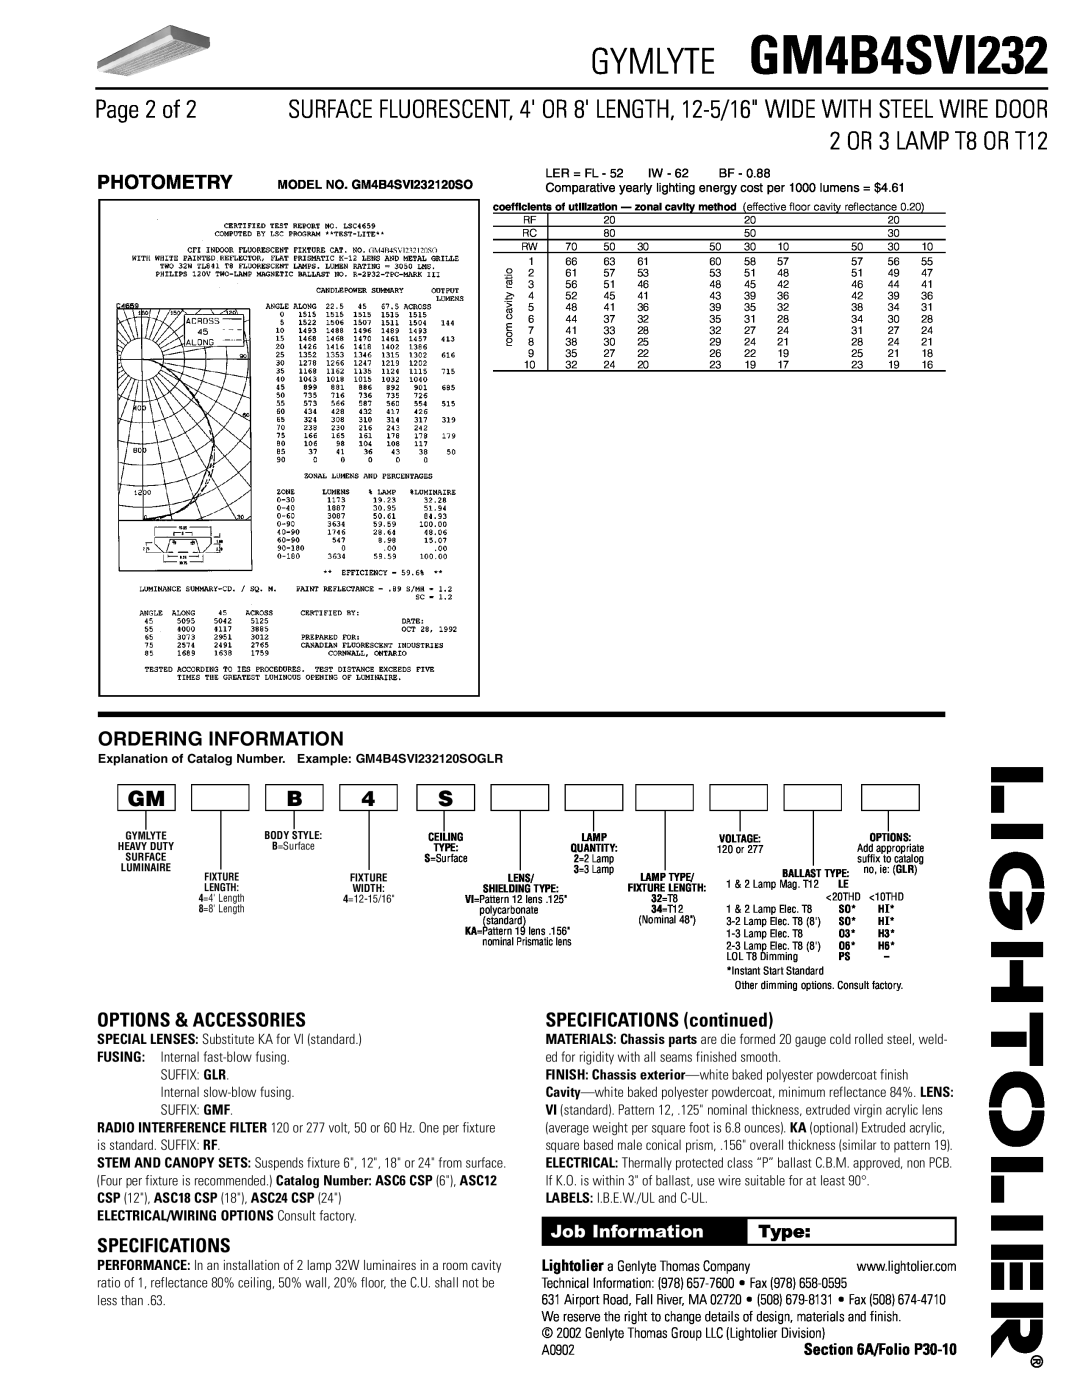 Lightolier GM4B4SVI232 Page 2 of, Photometry, Ordering Information, Options & Accessories, Specifications, Job Information 